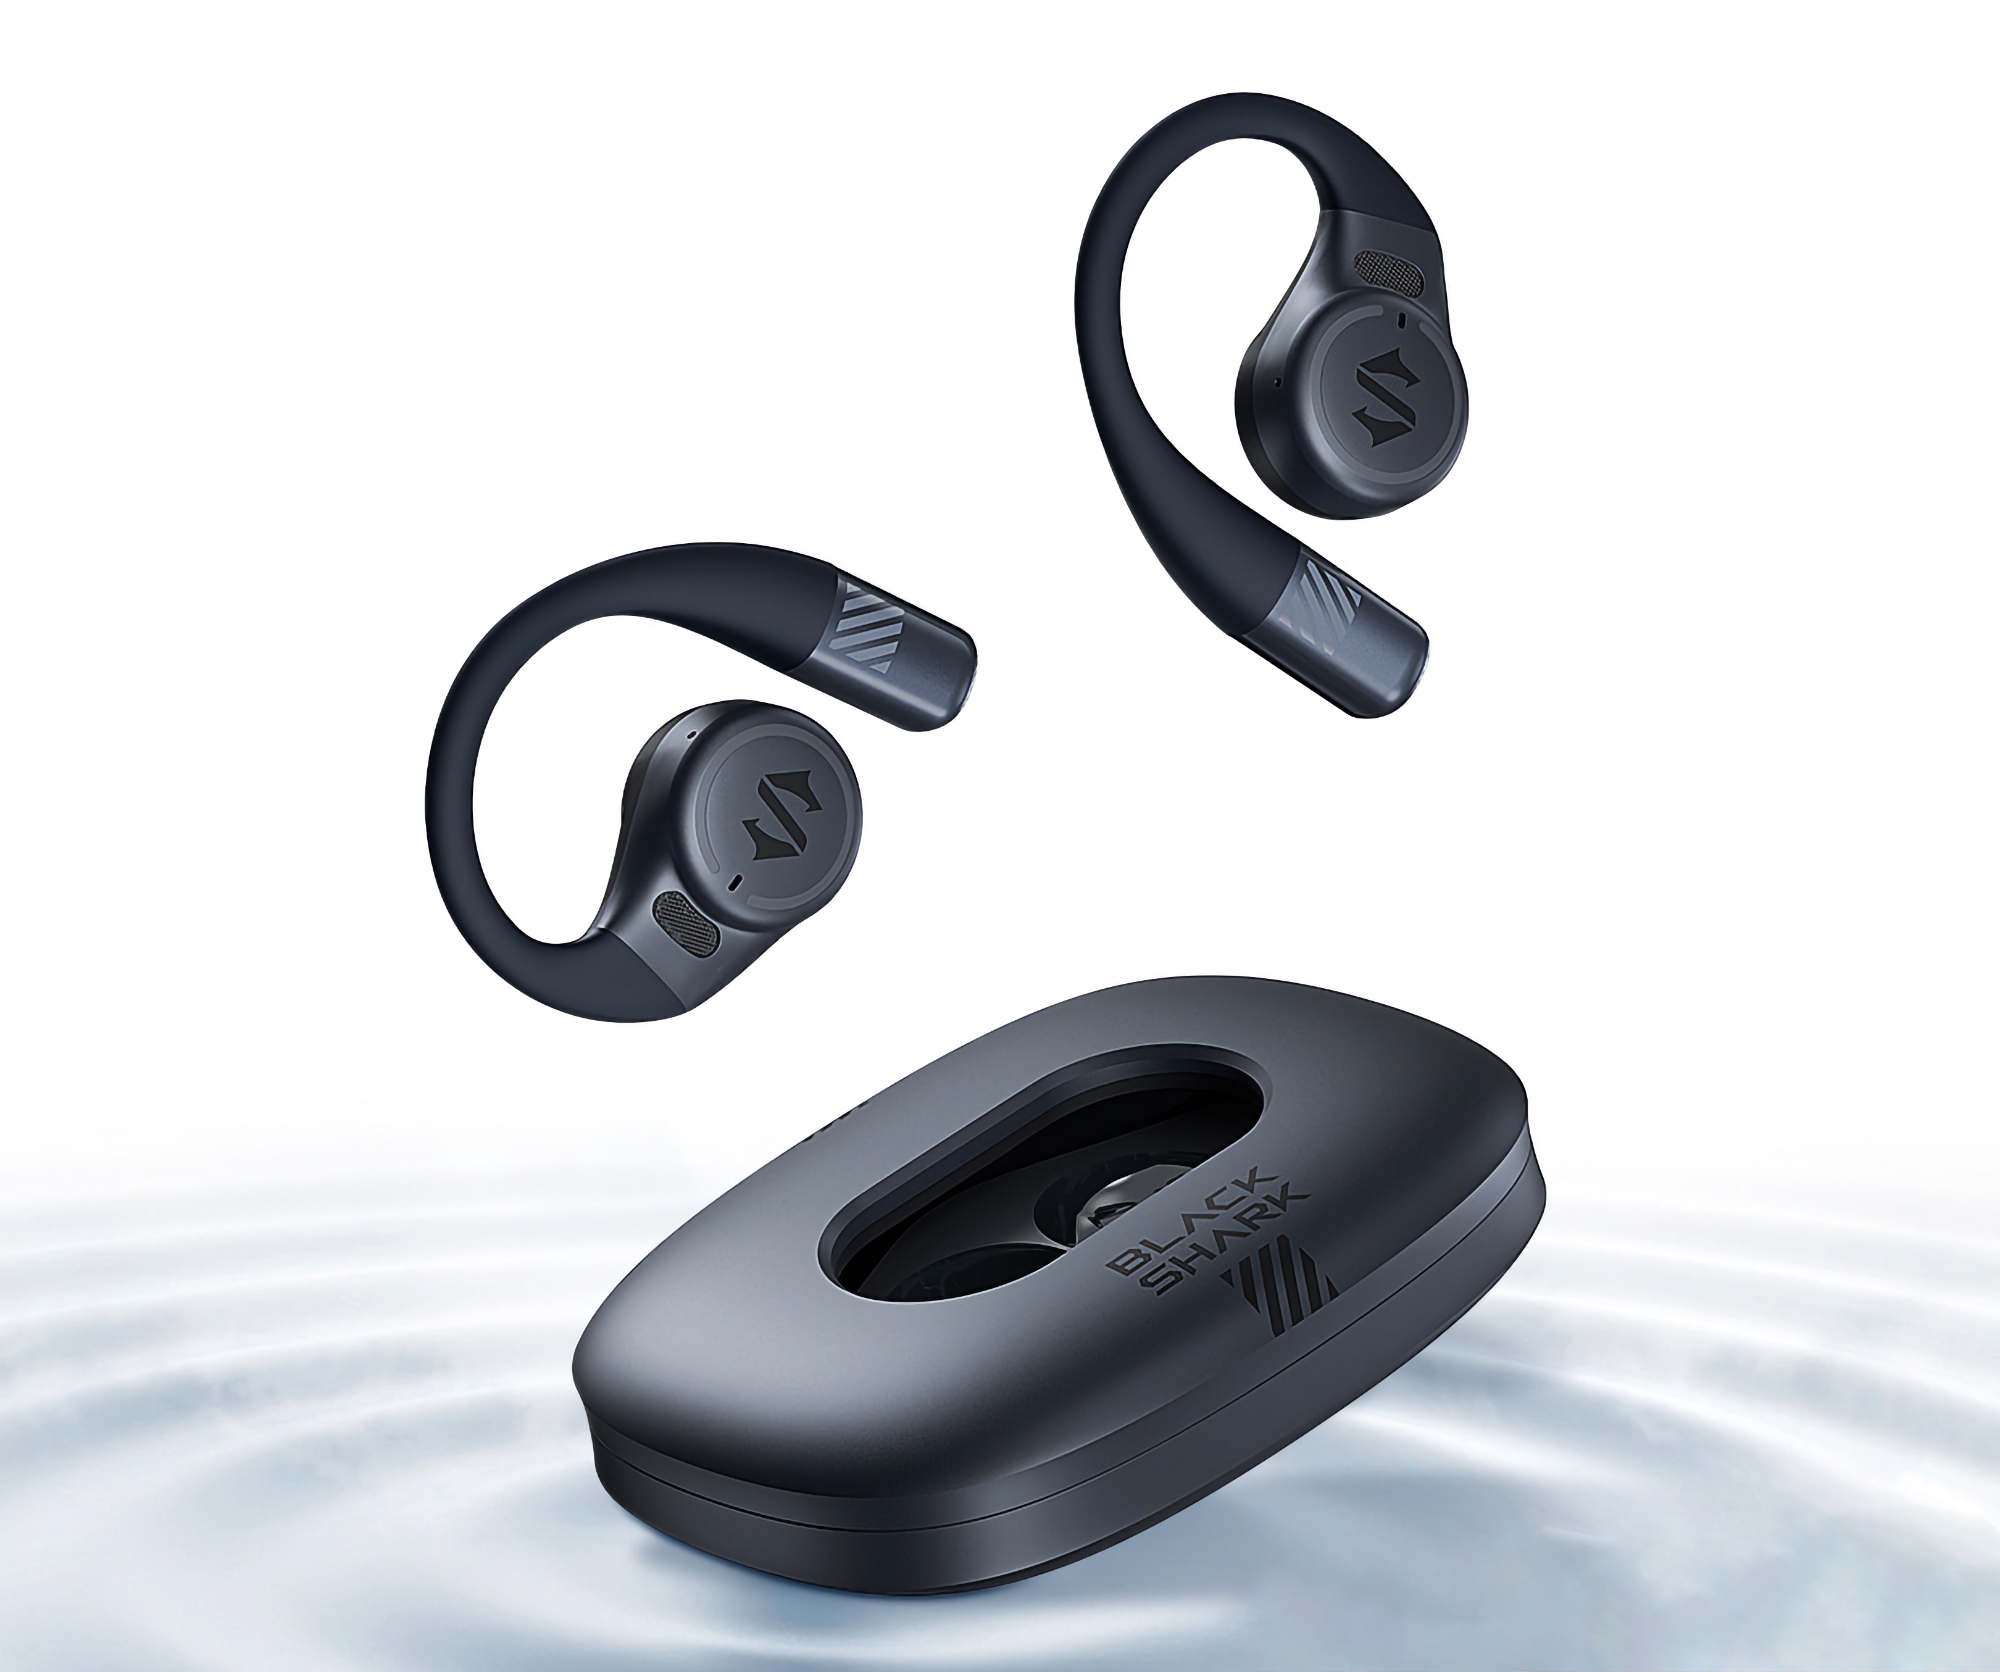 Xiaomi has revealed the Black Shark OWS 700: wireless headphones with open design, Bluetooth 5.3, IPX4 protection and up to 24 hours of battery life